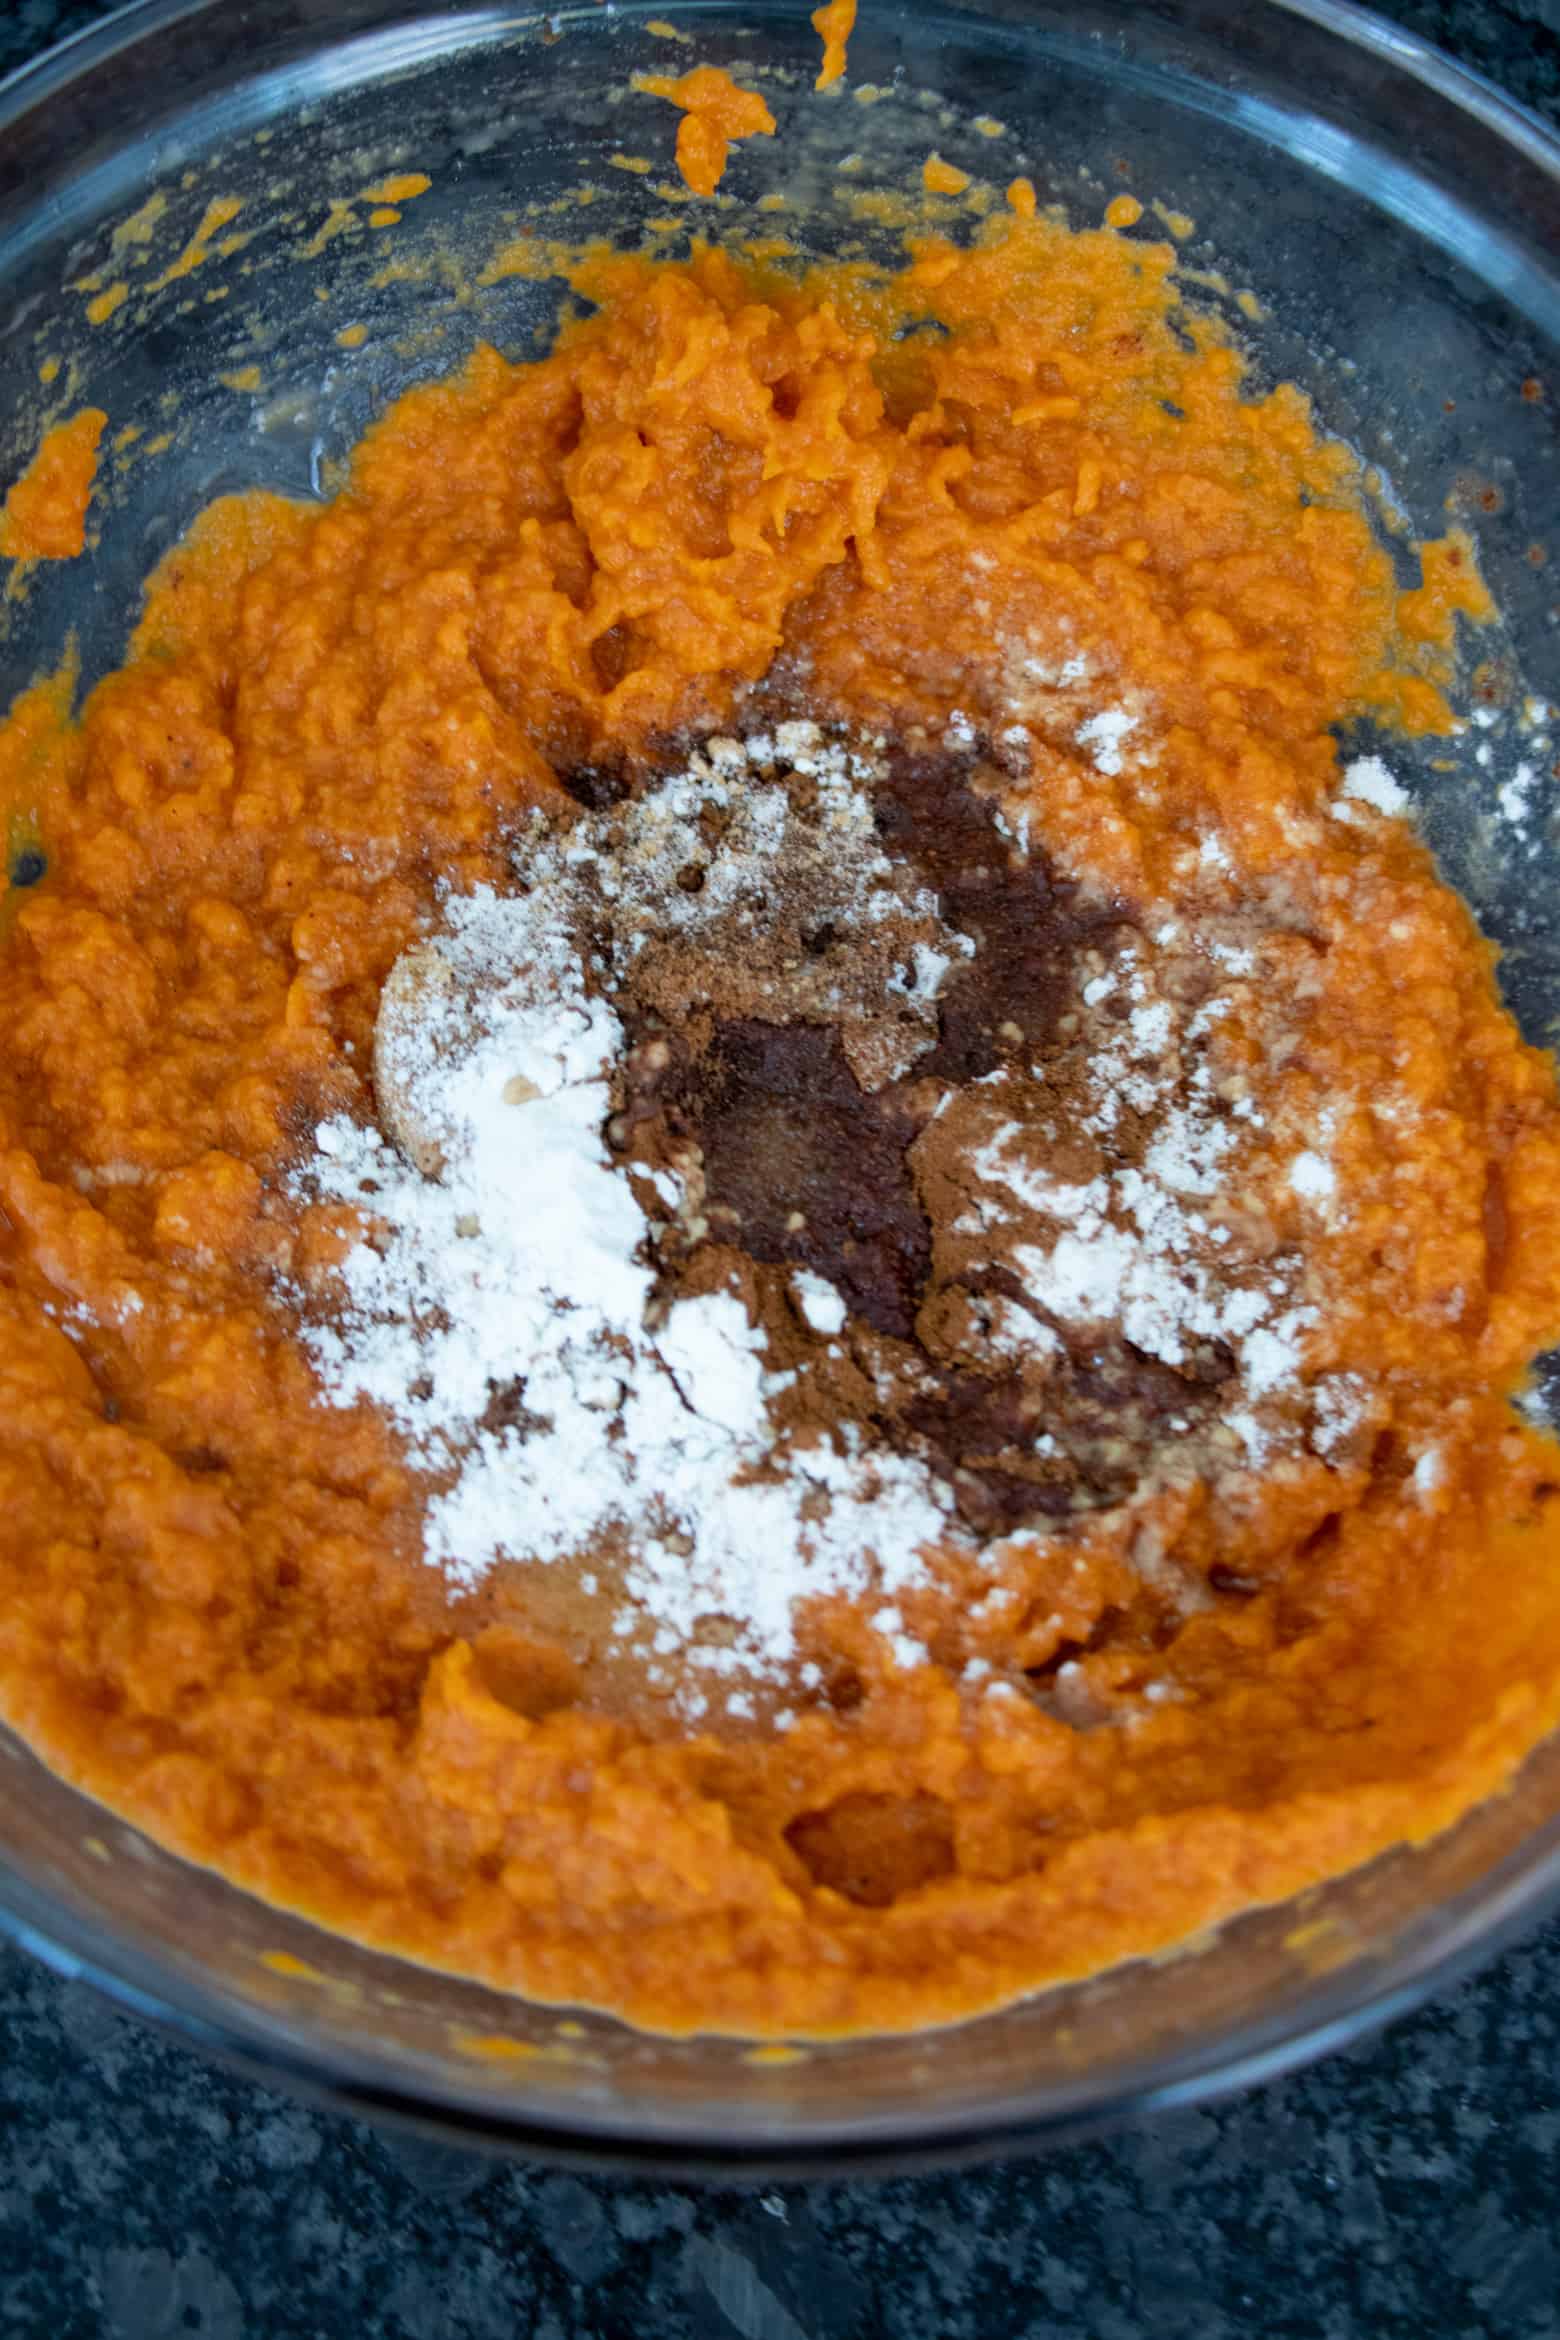 Pumpkin puree with warm spices and flour